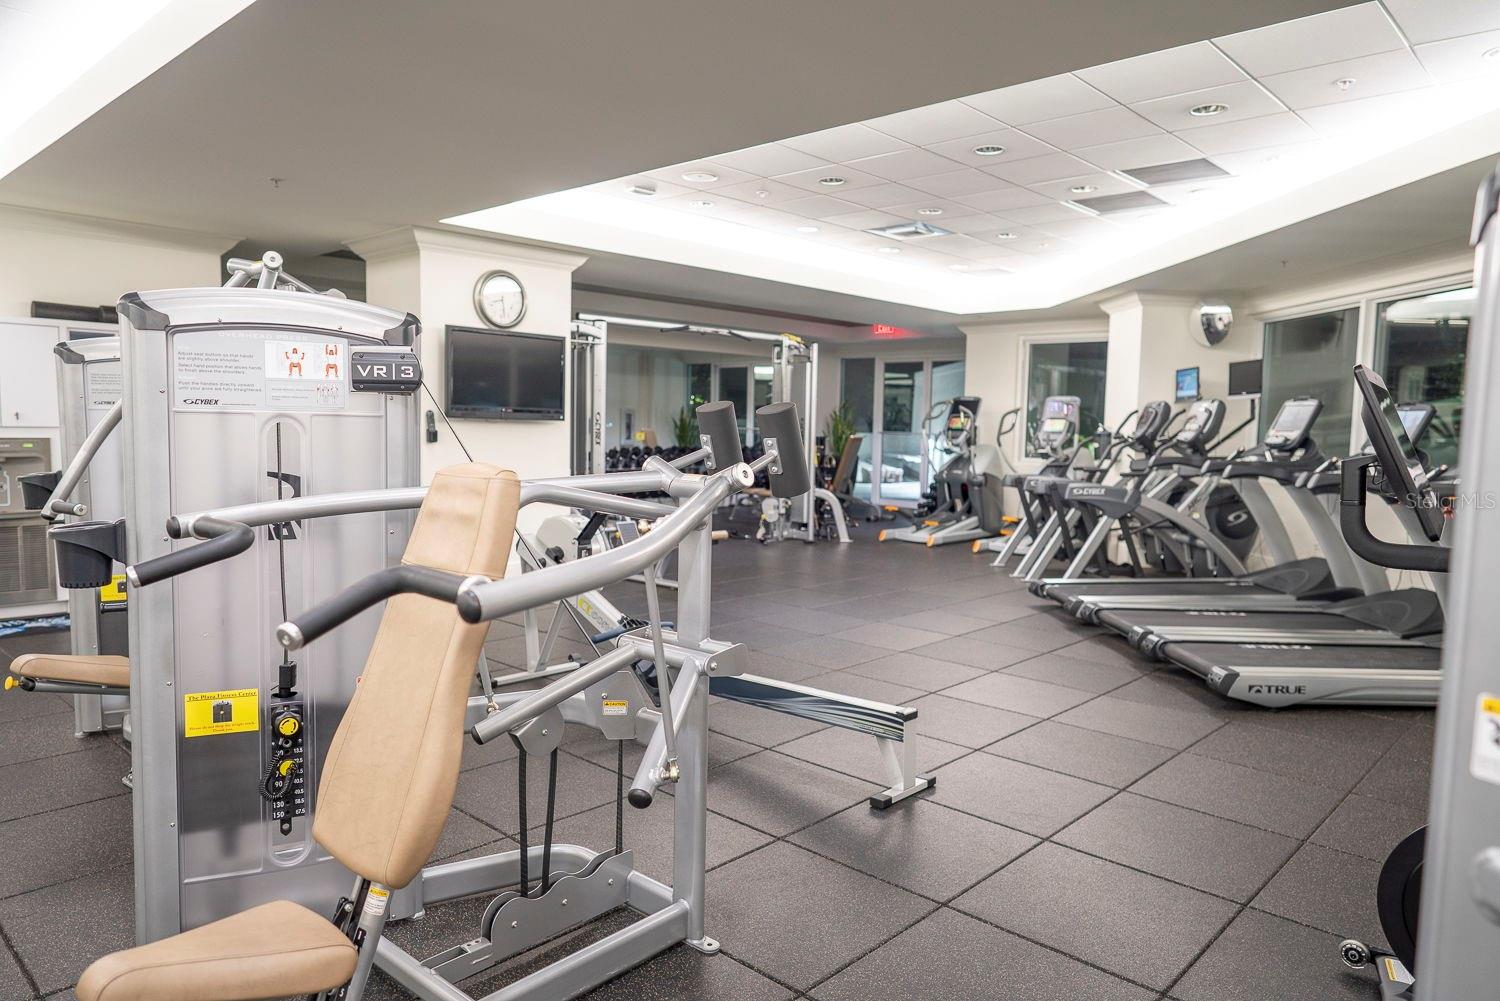 Fully equipped fitness center.